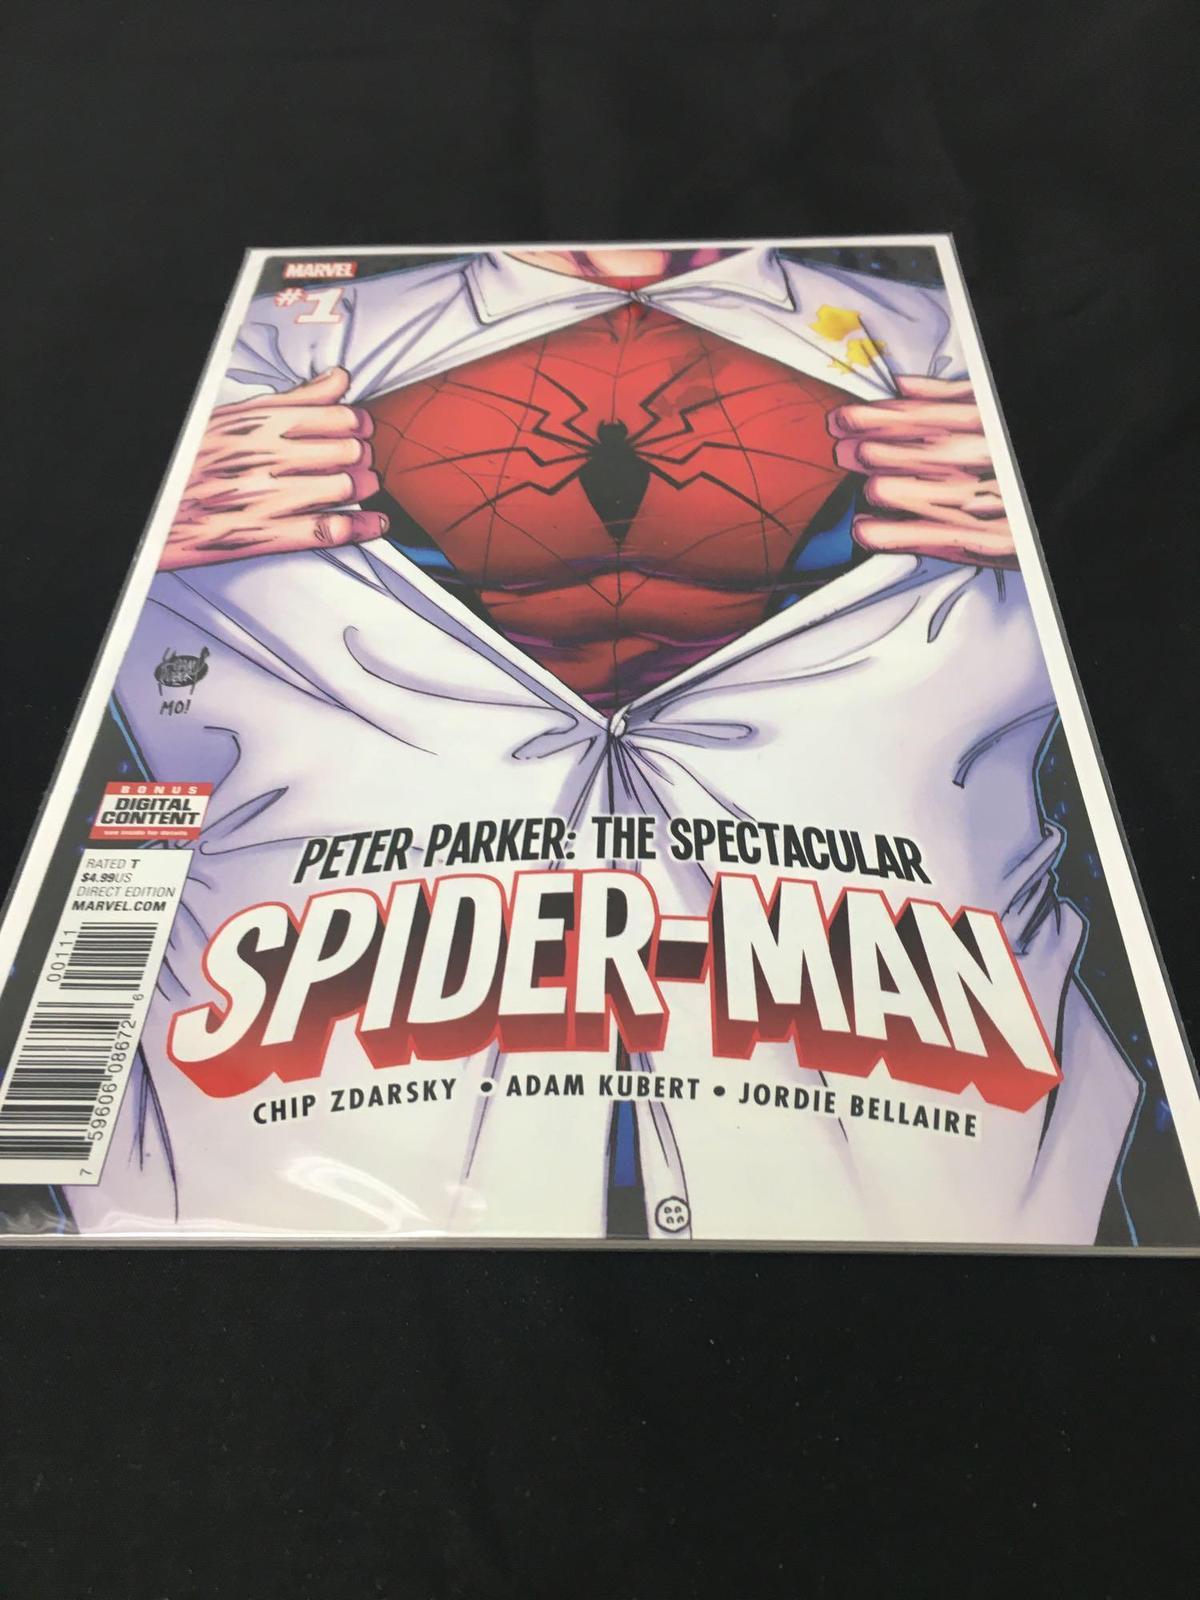 The Spectacular Spider Man #1 Comic Book from Amazing Collection